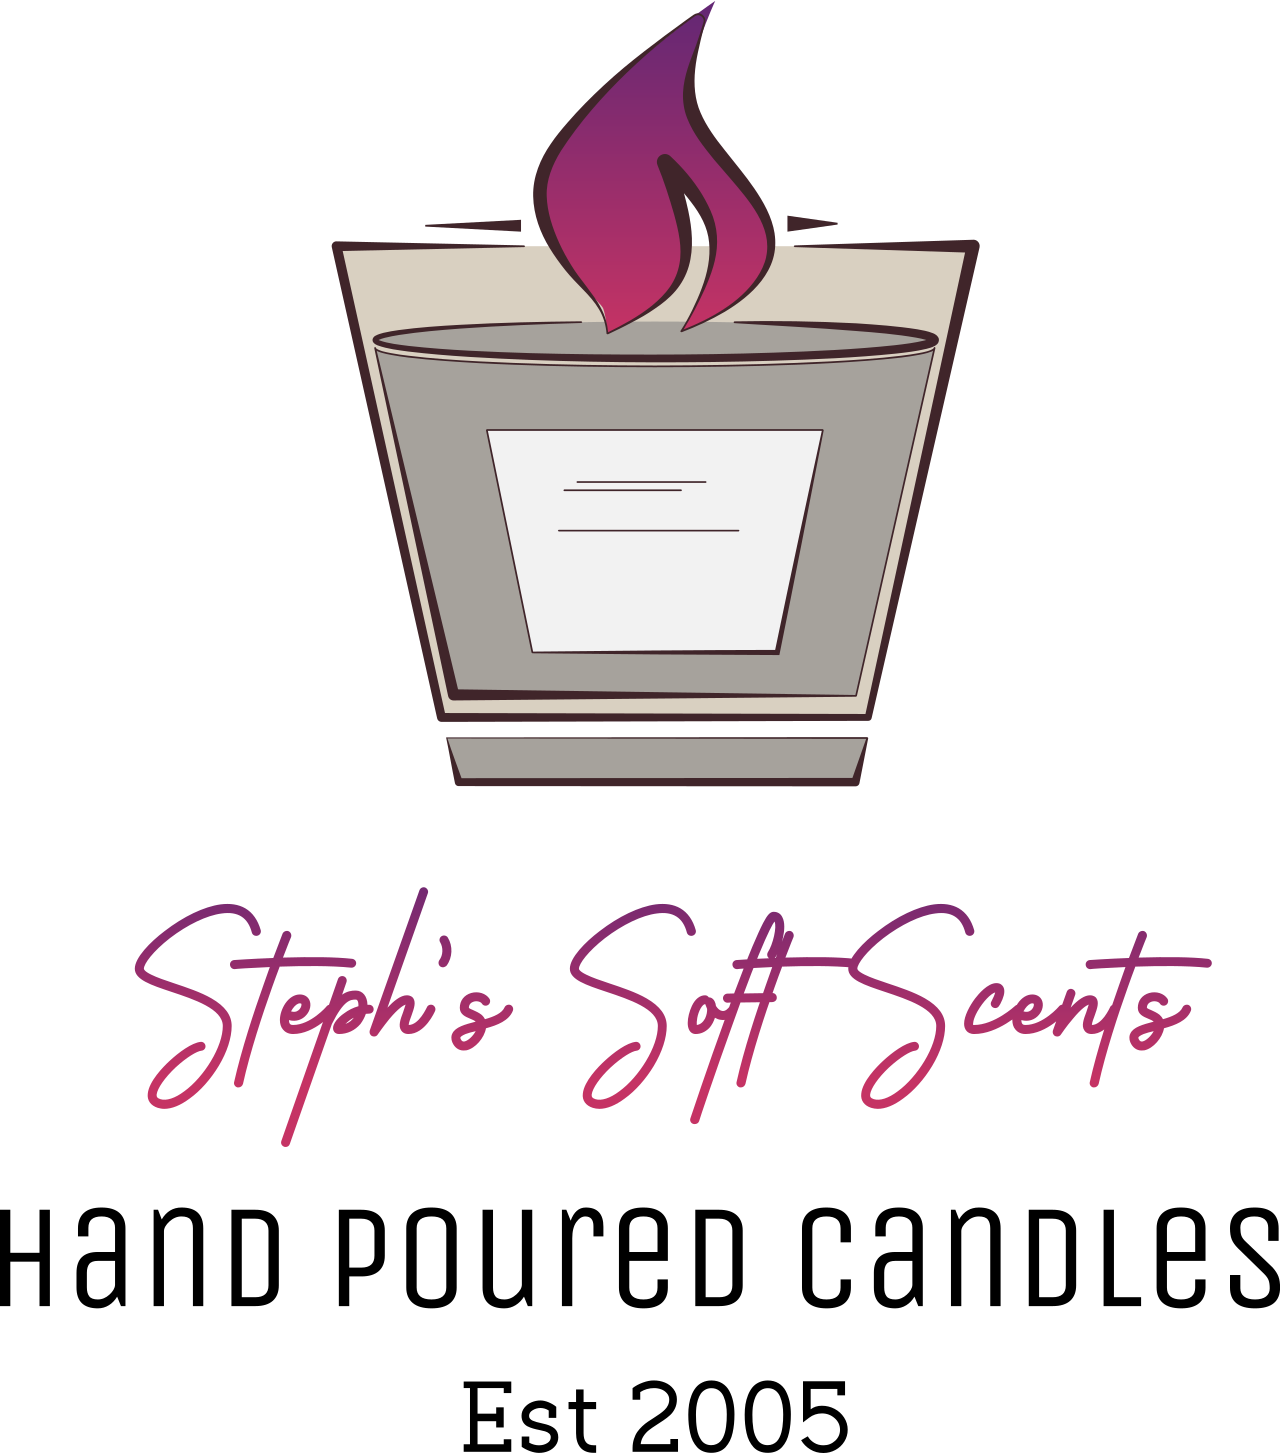 Steph's Soft Scents's logo